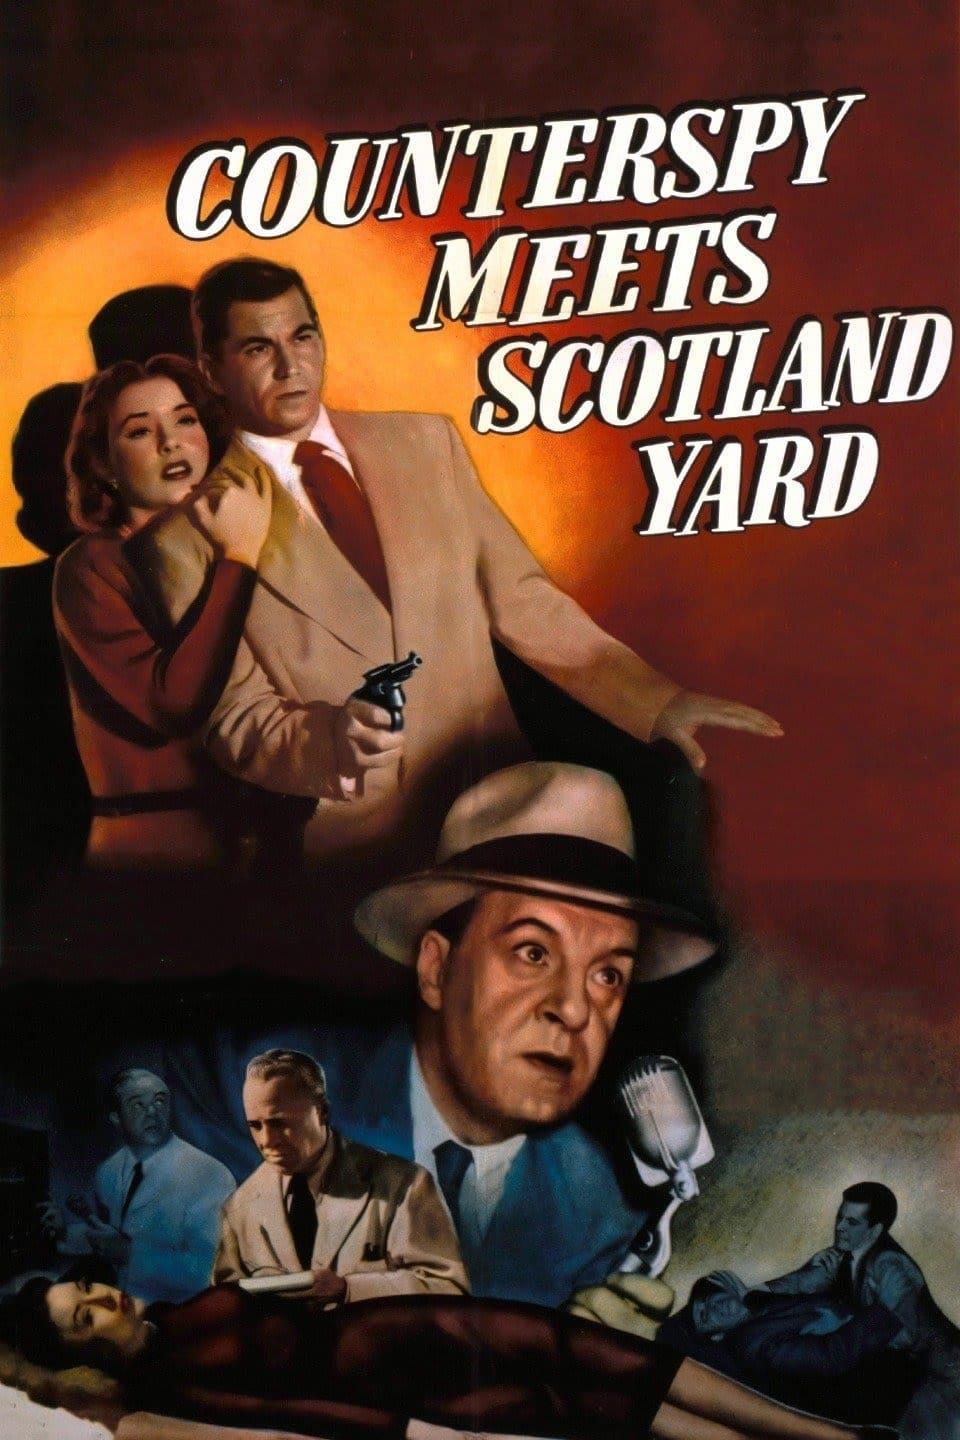 Counterspy Meets Scotland Yard poster